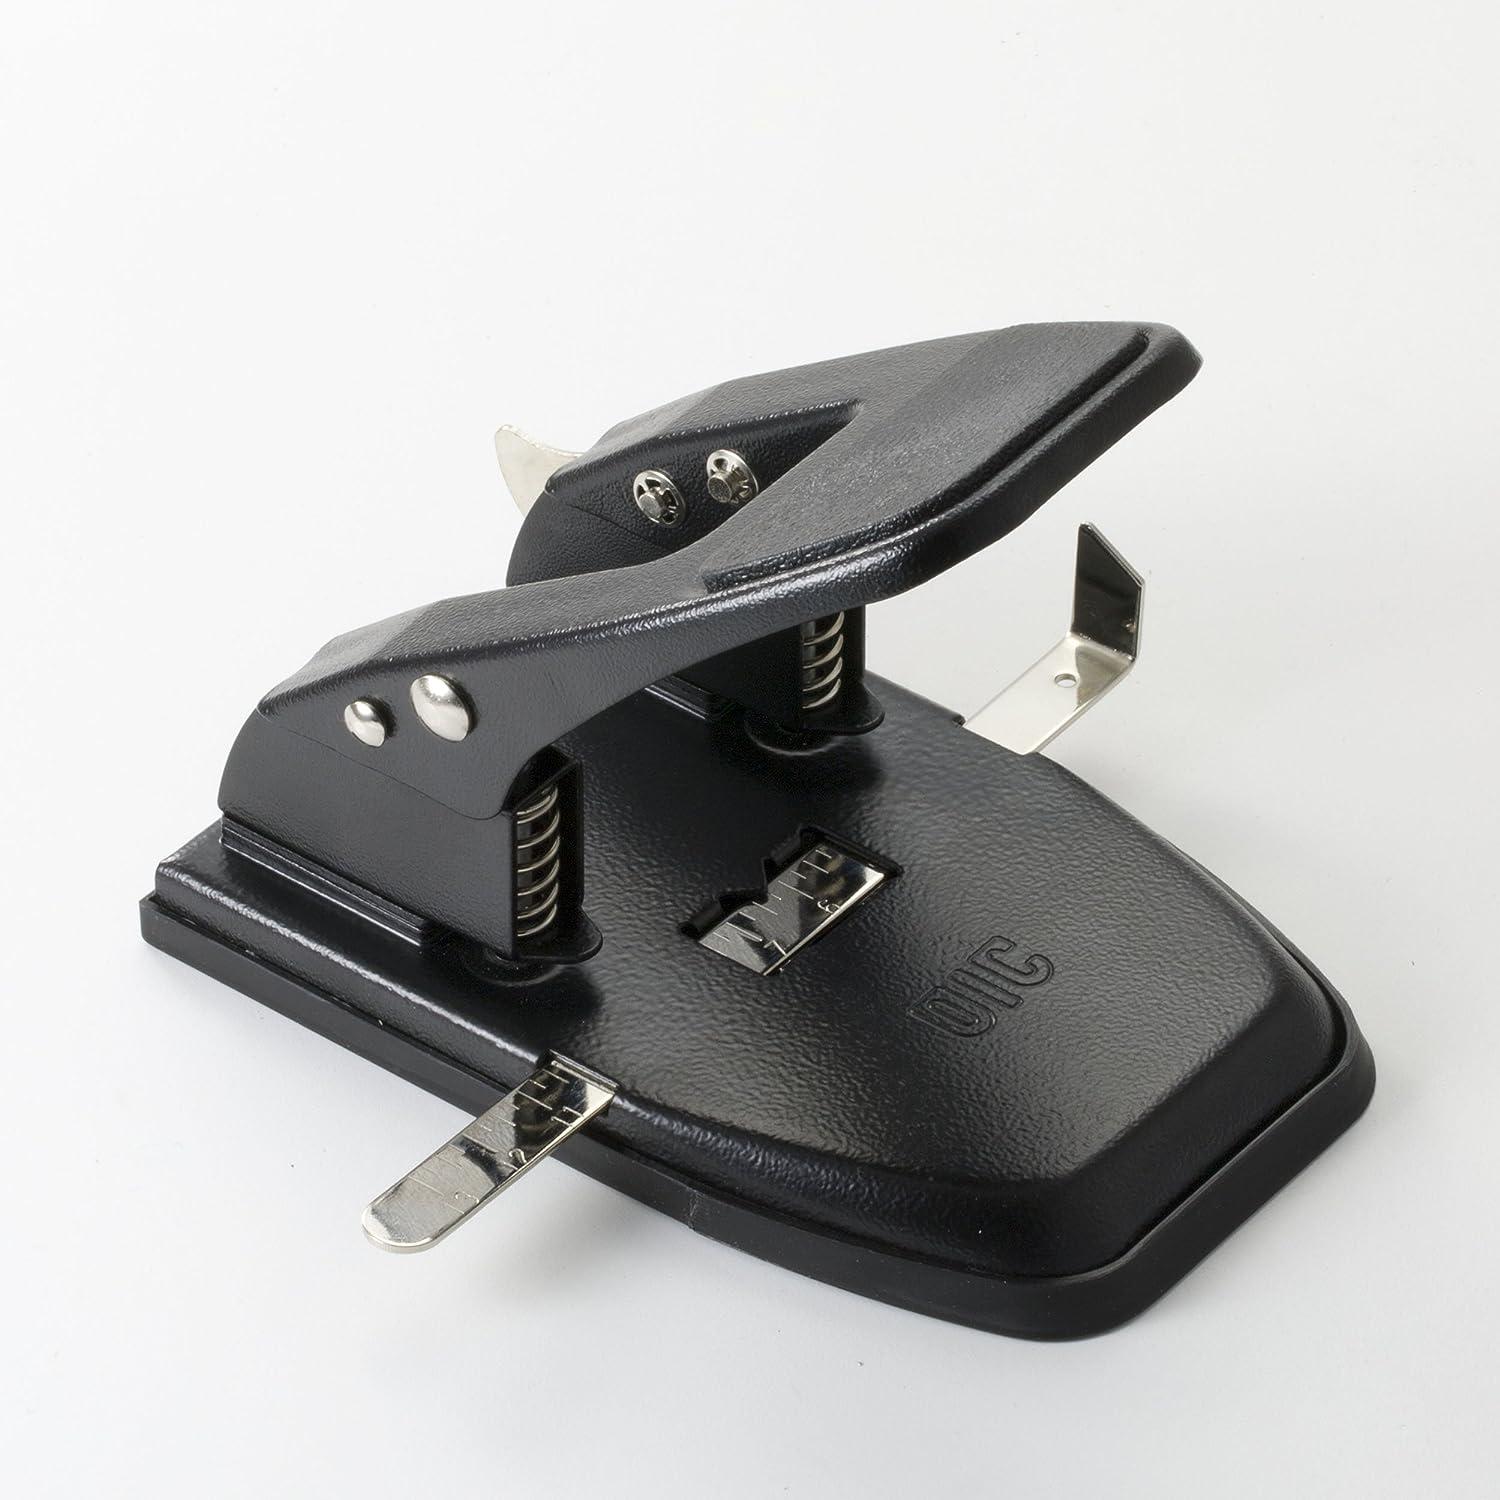 Officemate One Hole Hand Punch